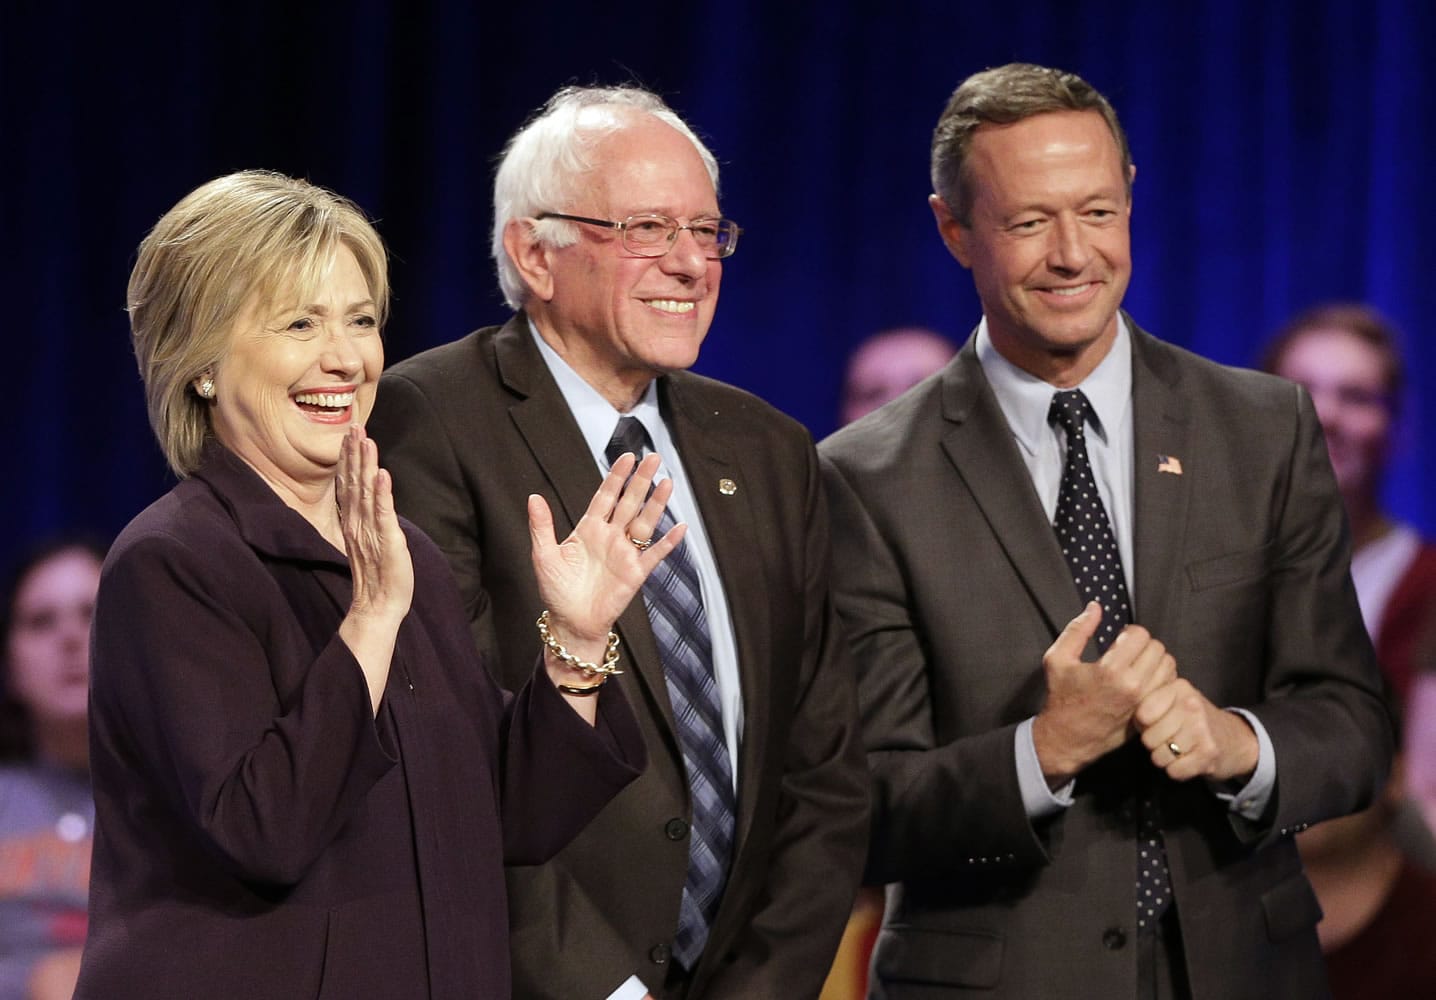 Democratic presidential candidates Hillary Rodham Clinton, from left, Sen. Bernie Sanders, I-Vt., and former Maryland Gov. Martin O'Malley, smile after a Democratic presidential candidate forum Nov. 6 at Winthrop University in Rock Hill, S.C. Clinton has locked up public support from half of the Democratic insiders who cast ballots at the party's national convention, giving her a commanding advantage over her rivals for the party's presidential nomination. Clinton's margin over Sanders and OMalley is striking.